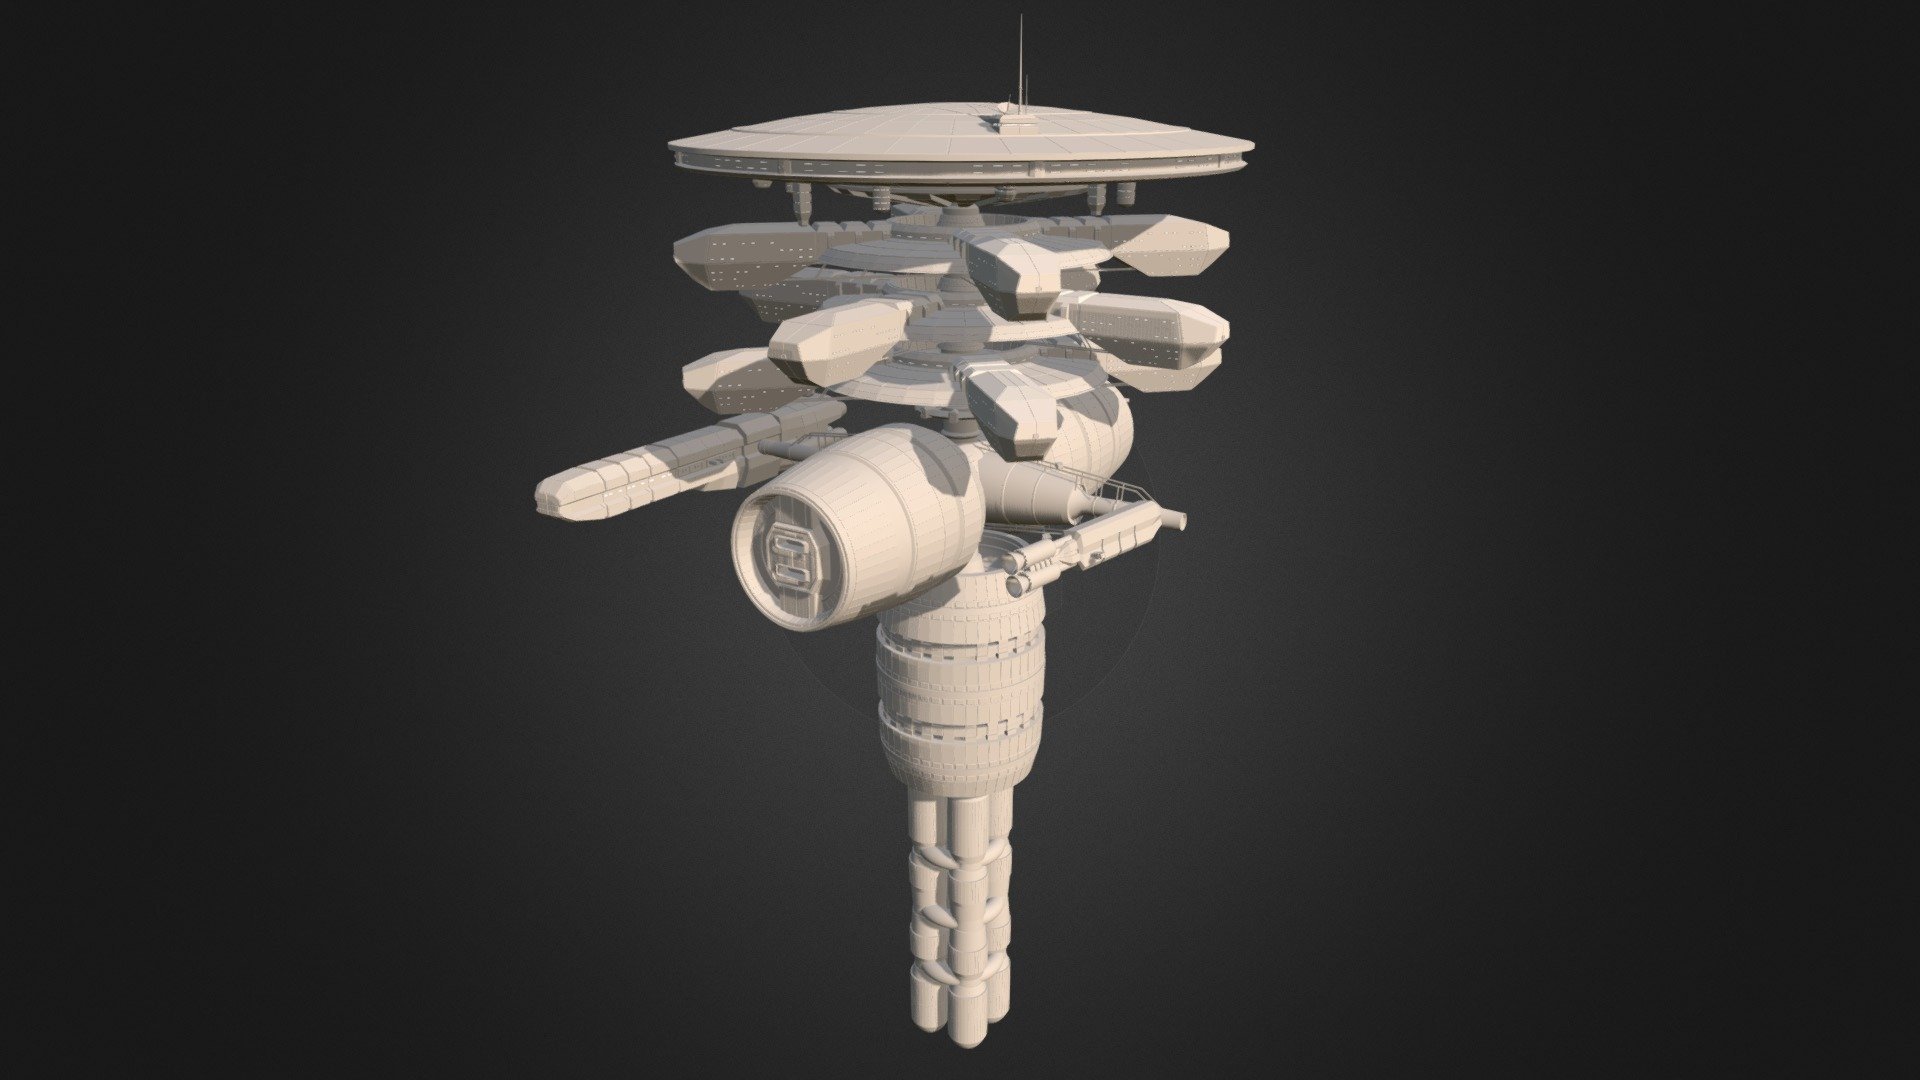 In progress space station mock-up for sci-fi audio drama a friend is making. This friend is also a huge Discworld fan. You can find that audio drama here: https://dockingpod.com/. Made in Blender 3d model